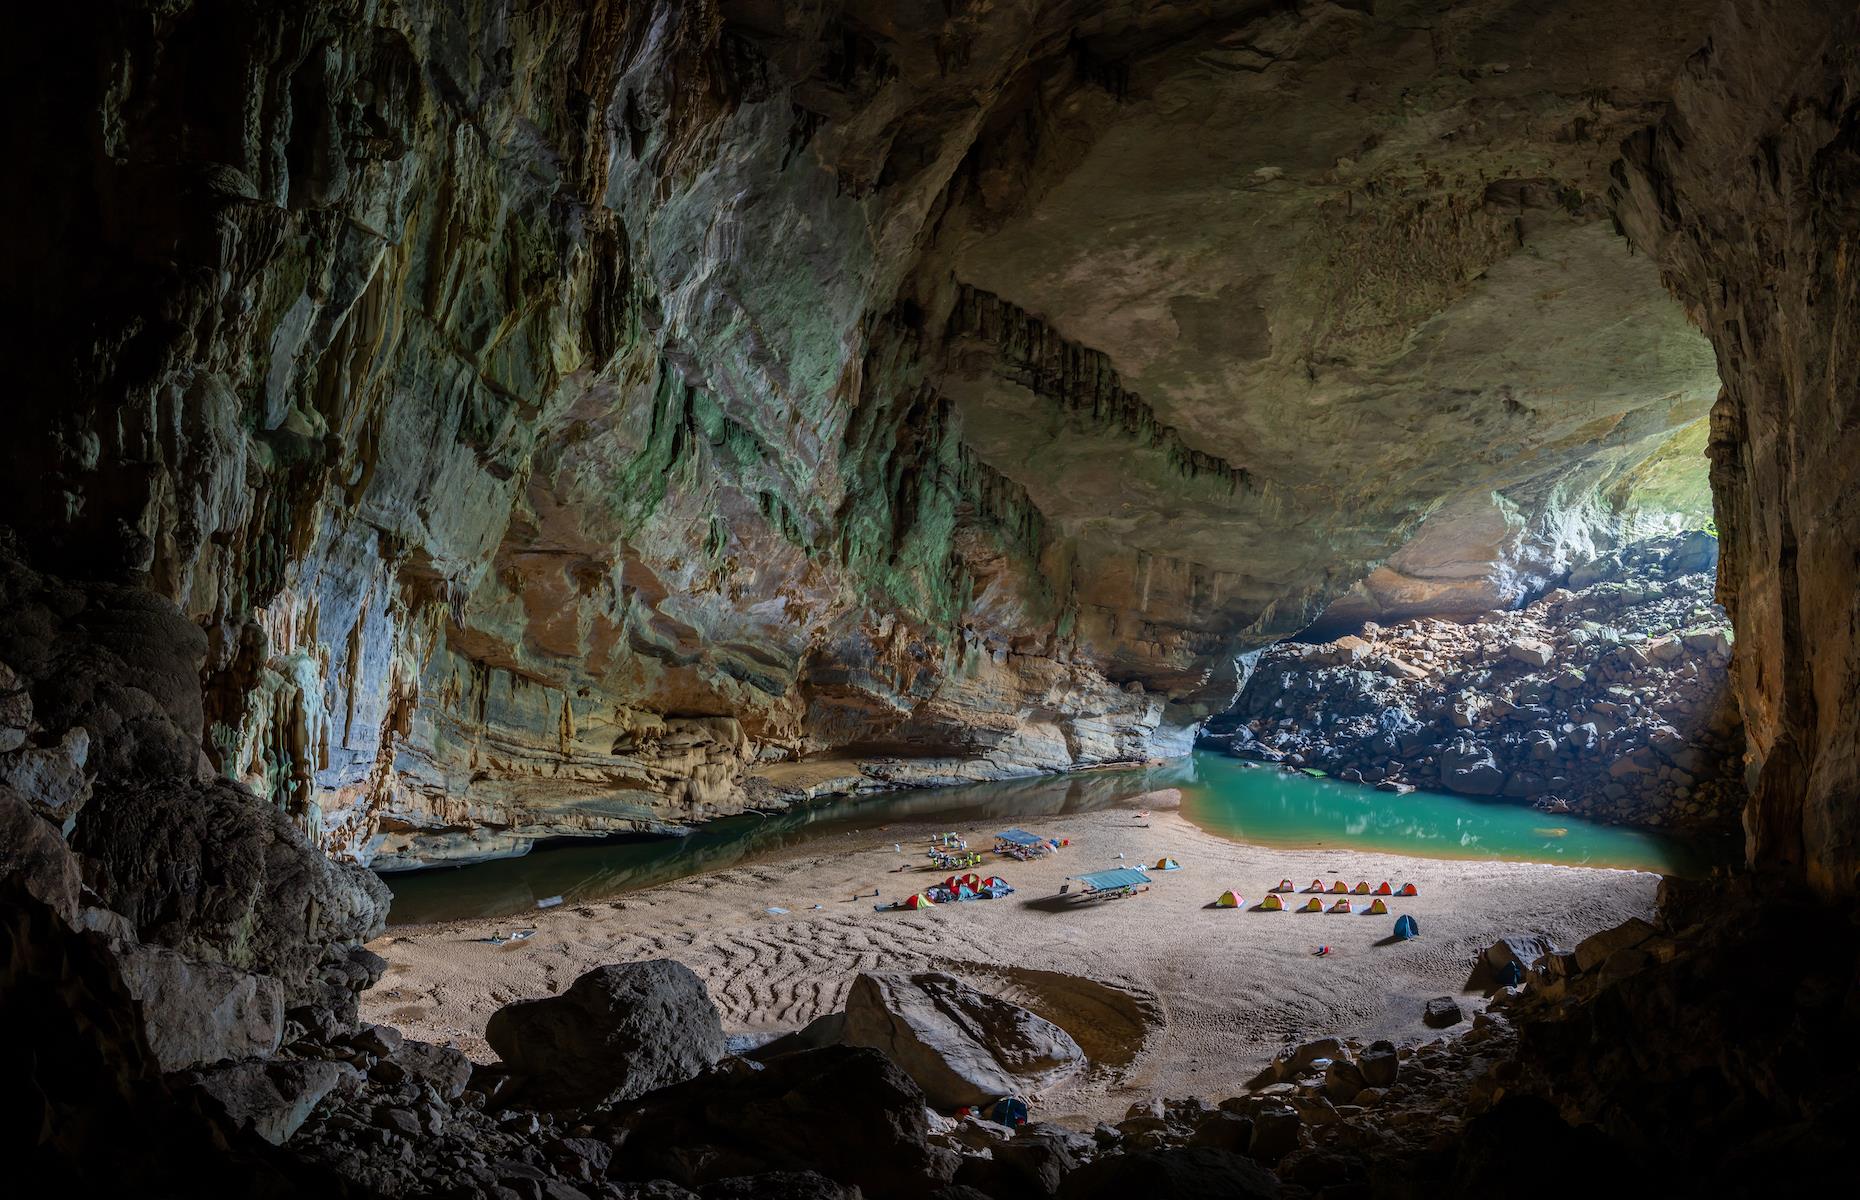 <p>Vietnam is full of awe-inspiring beauty but Son Doong Cave in Phong Nha-Ke Bang National Park takes it to another level. The main passage of this vast cavern is just over three miles (5km) long, with parts of it reaching up to 656 feet tall (200m) and 541 feet wide (165m). In total it’s over five-and-a-half miles (9km) long. Even more mind-blowing is that within its depths lie a primeval rainforest and underground river, and it has its own microclimate. You can’t just wander in, however. The cave can only be explored on a guided tour, and numbers are limited to 1,000 visitors a year to protect this extraordinary and fragile natural wonder.</p>